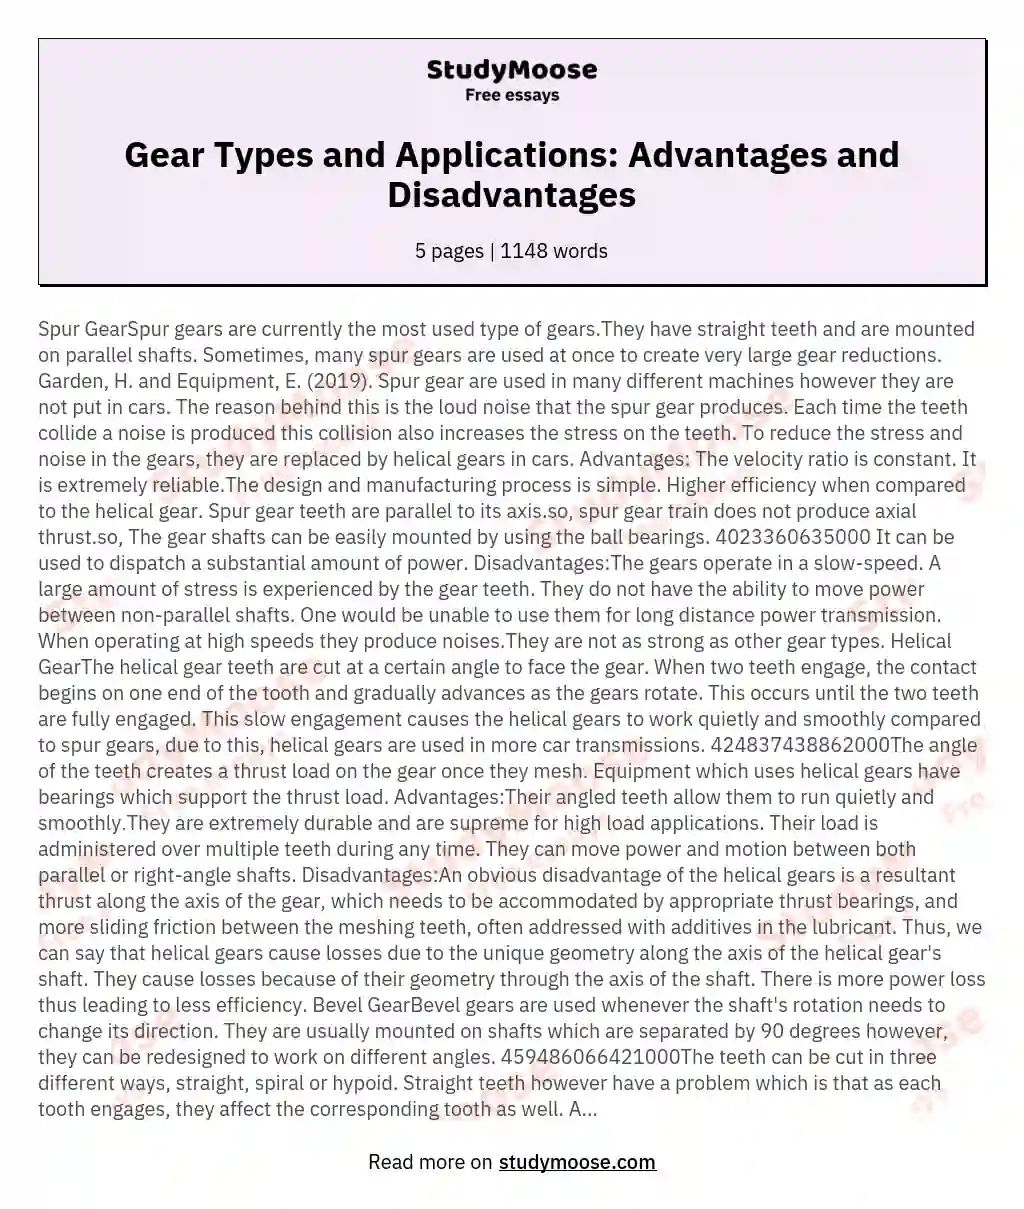 Gear Types and Applications: Advantages and Disadvantages essay